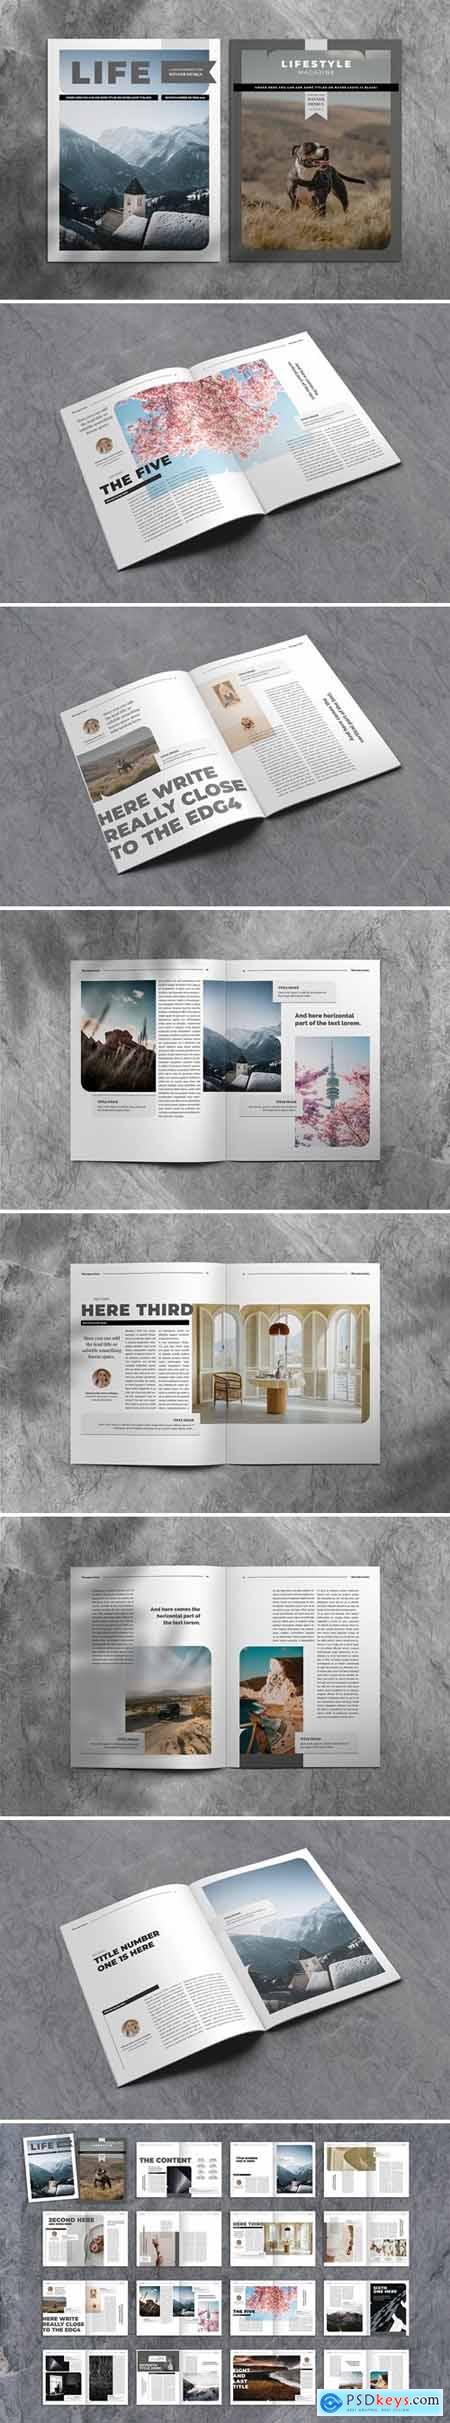 Lifestyle Indesign Template